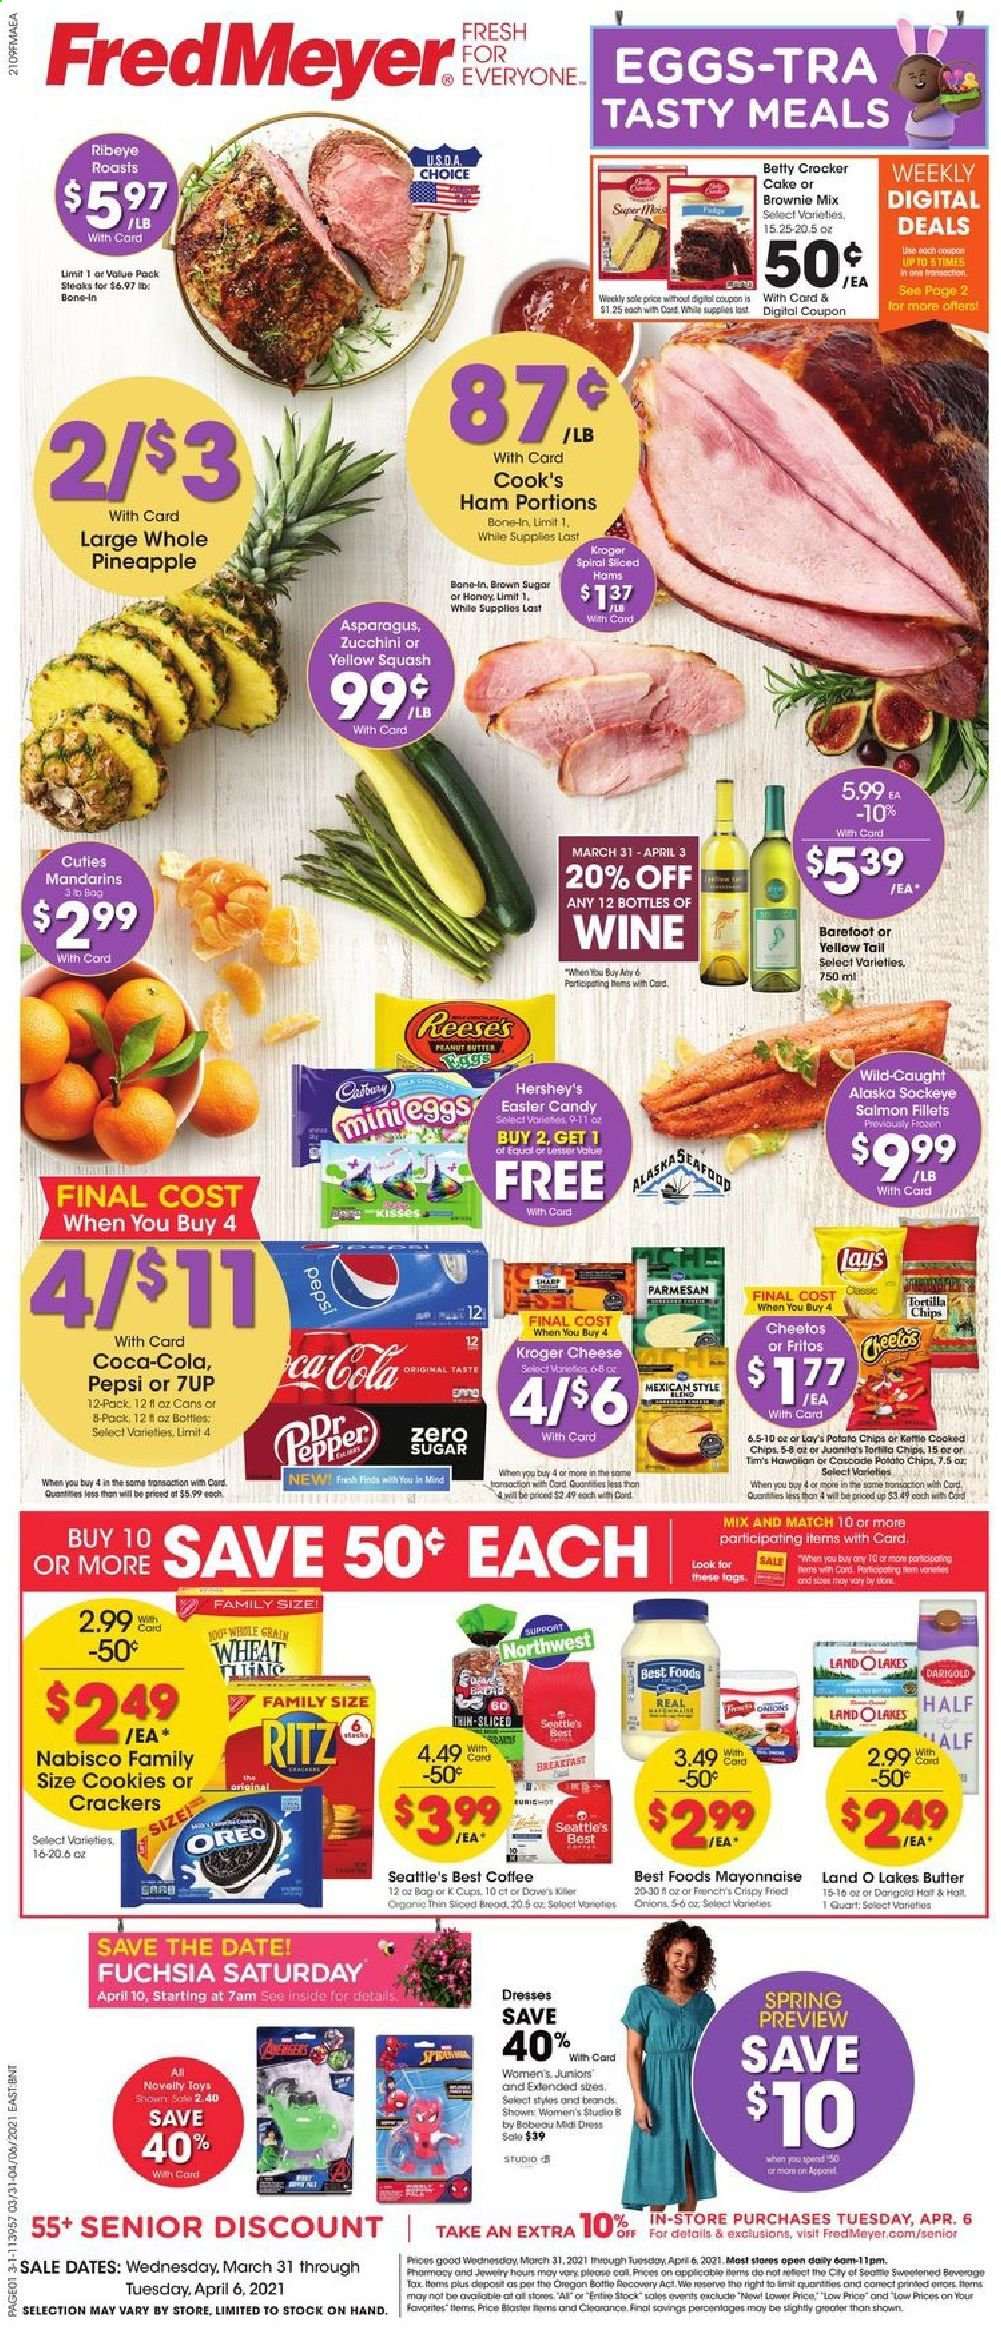 thumbnail - Fred Meyer Flyer - 03/31/2021 - 04/06/2021 - Sales products - zucchini, brownie mix, cake, salmon, salmon fillet, fish, ham, parmesan, cheese, Oreo, eggs, butter, mayonnaise, Reese's, Hershey's, cookies, crackers, Cadbury, RITZ, tortilla chips, potato chips, Cheetos, chips, Lay’s, cane sugar, mandarines, Fritos, Coca-Cola, Pepsi, 7UP, coffee, wine, Cook's, steak, toys, asparagus, pineapple, onion. Page 1.